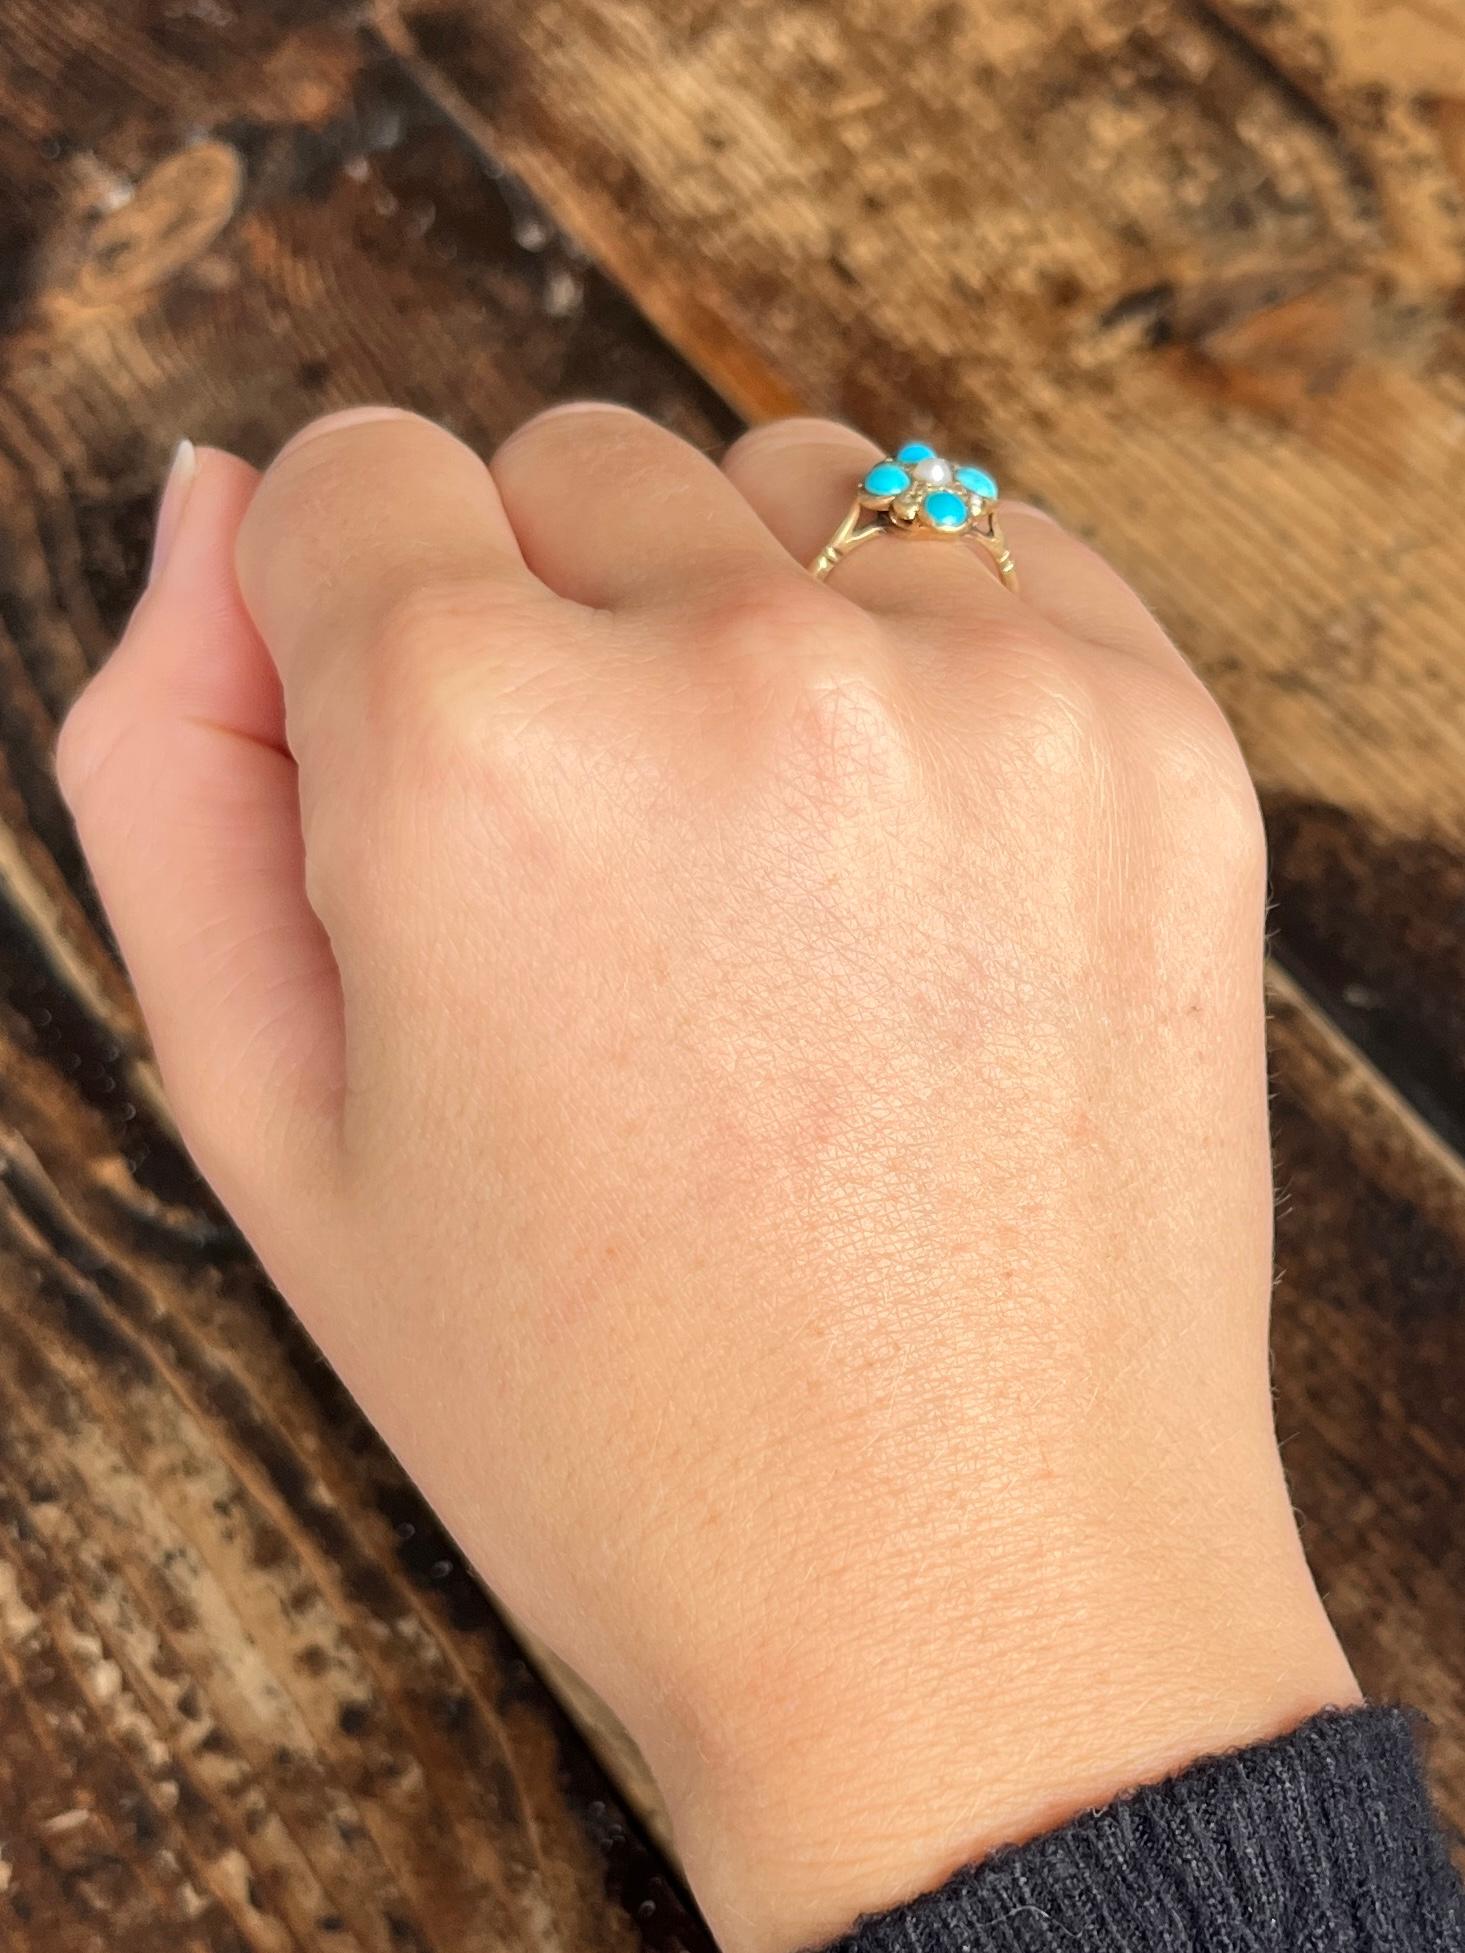 This beauty has a simple 18ct gold shank. There are four turquoise stones and at the centre is a pearl. In between the turquoise stones are rose cut diamond points. 

Ring Size: 6 or L 1/2 
Cluster Diamater: 12mm

Weight: 2.4g